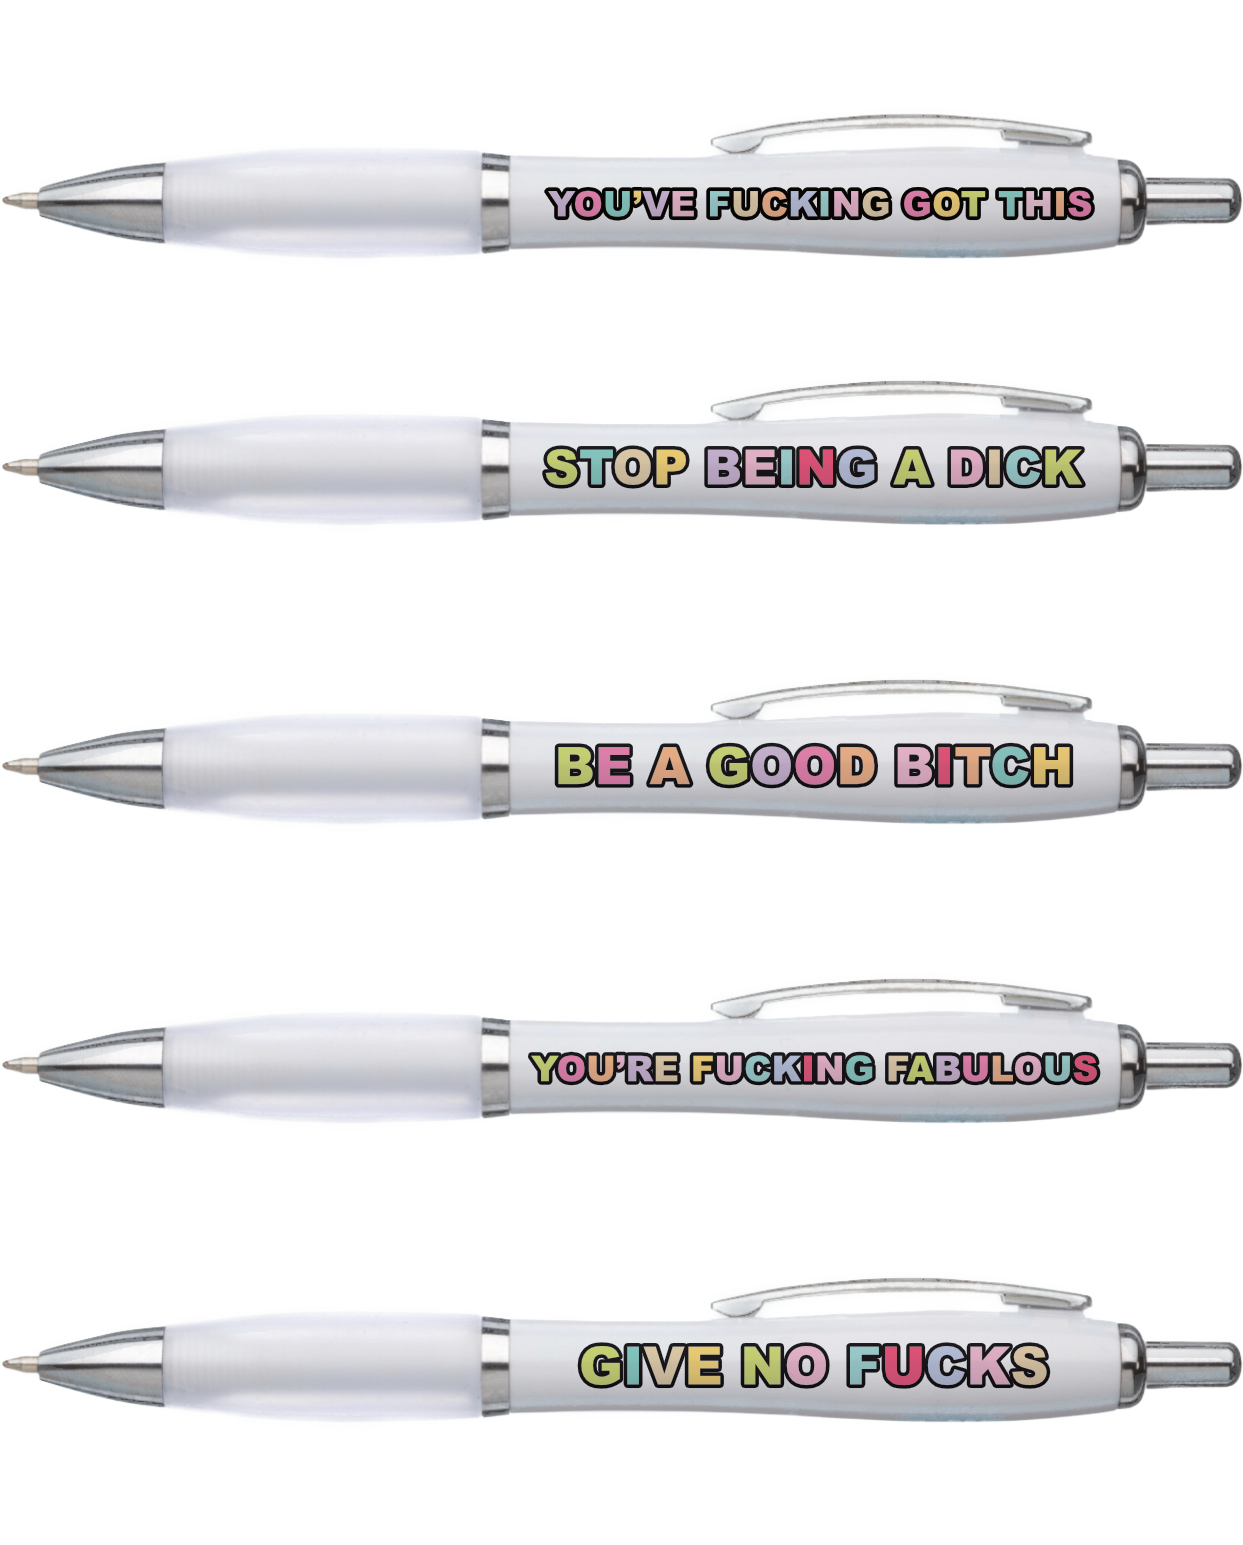 5 pack of white pens with black ink. Each pen has a bold quote in rainbow colours i.e stop being a dick, you've fucking got this.